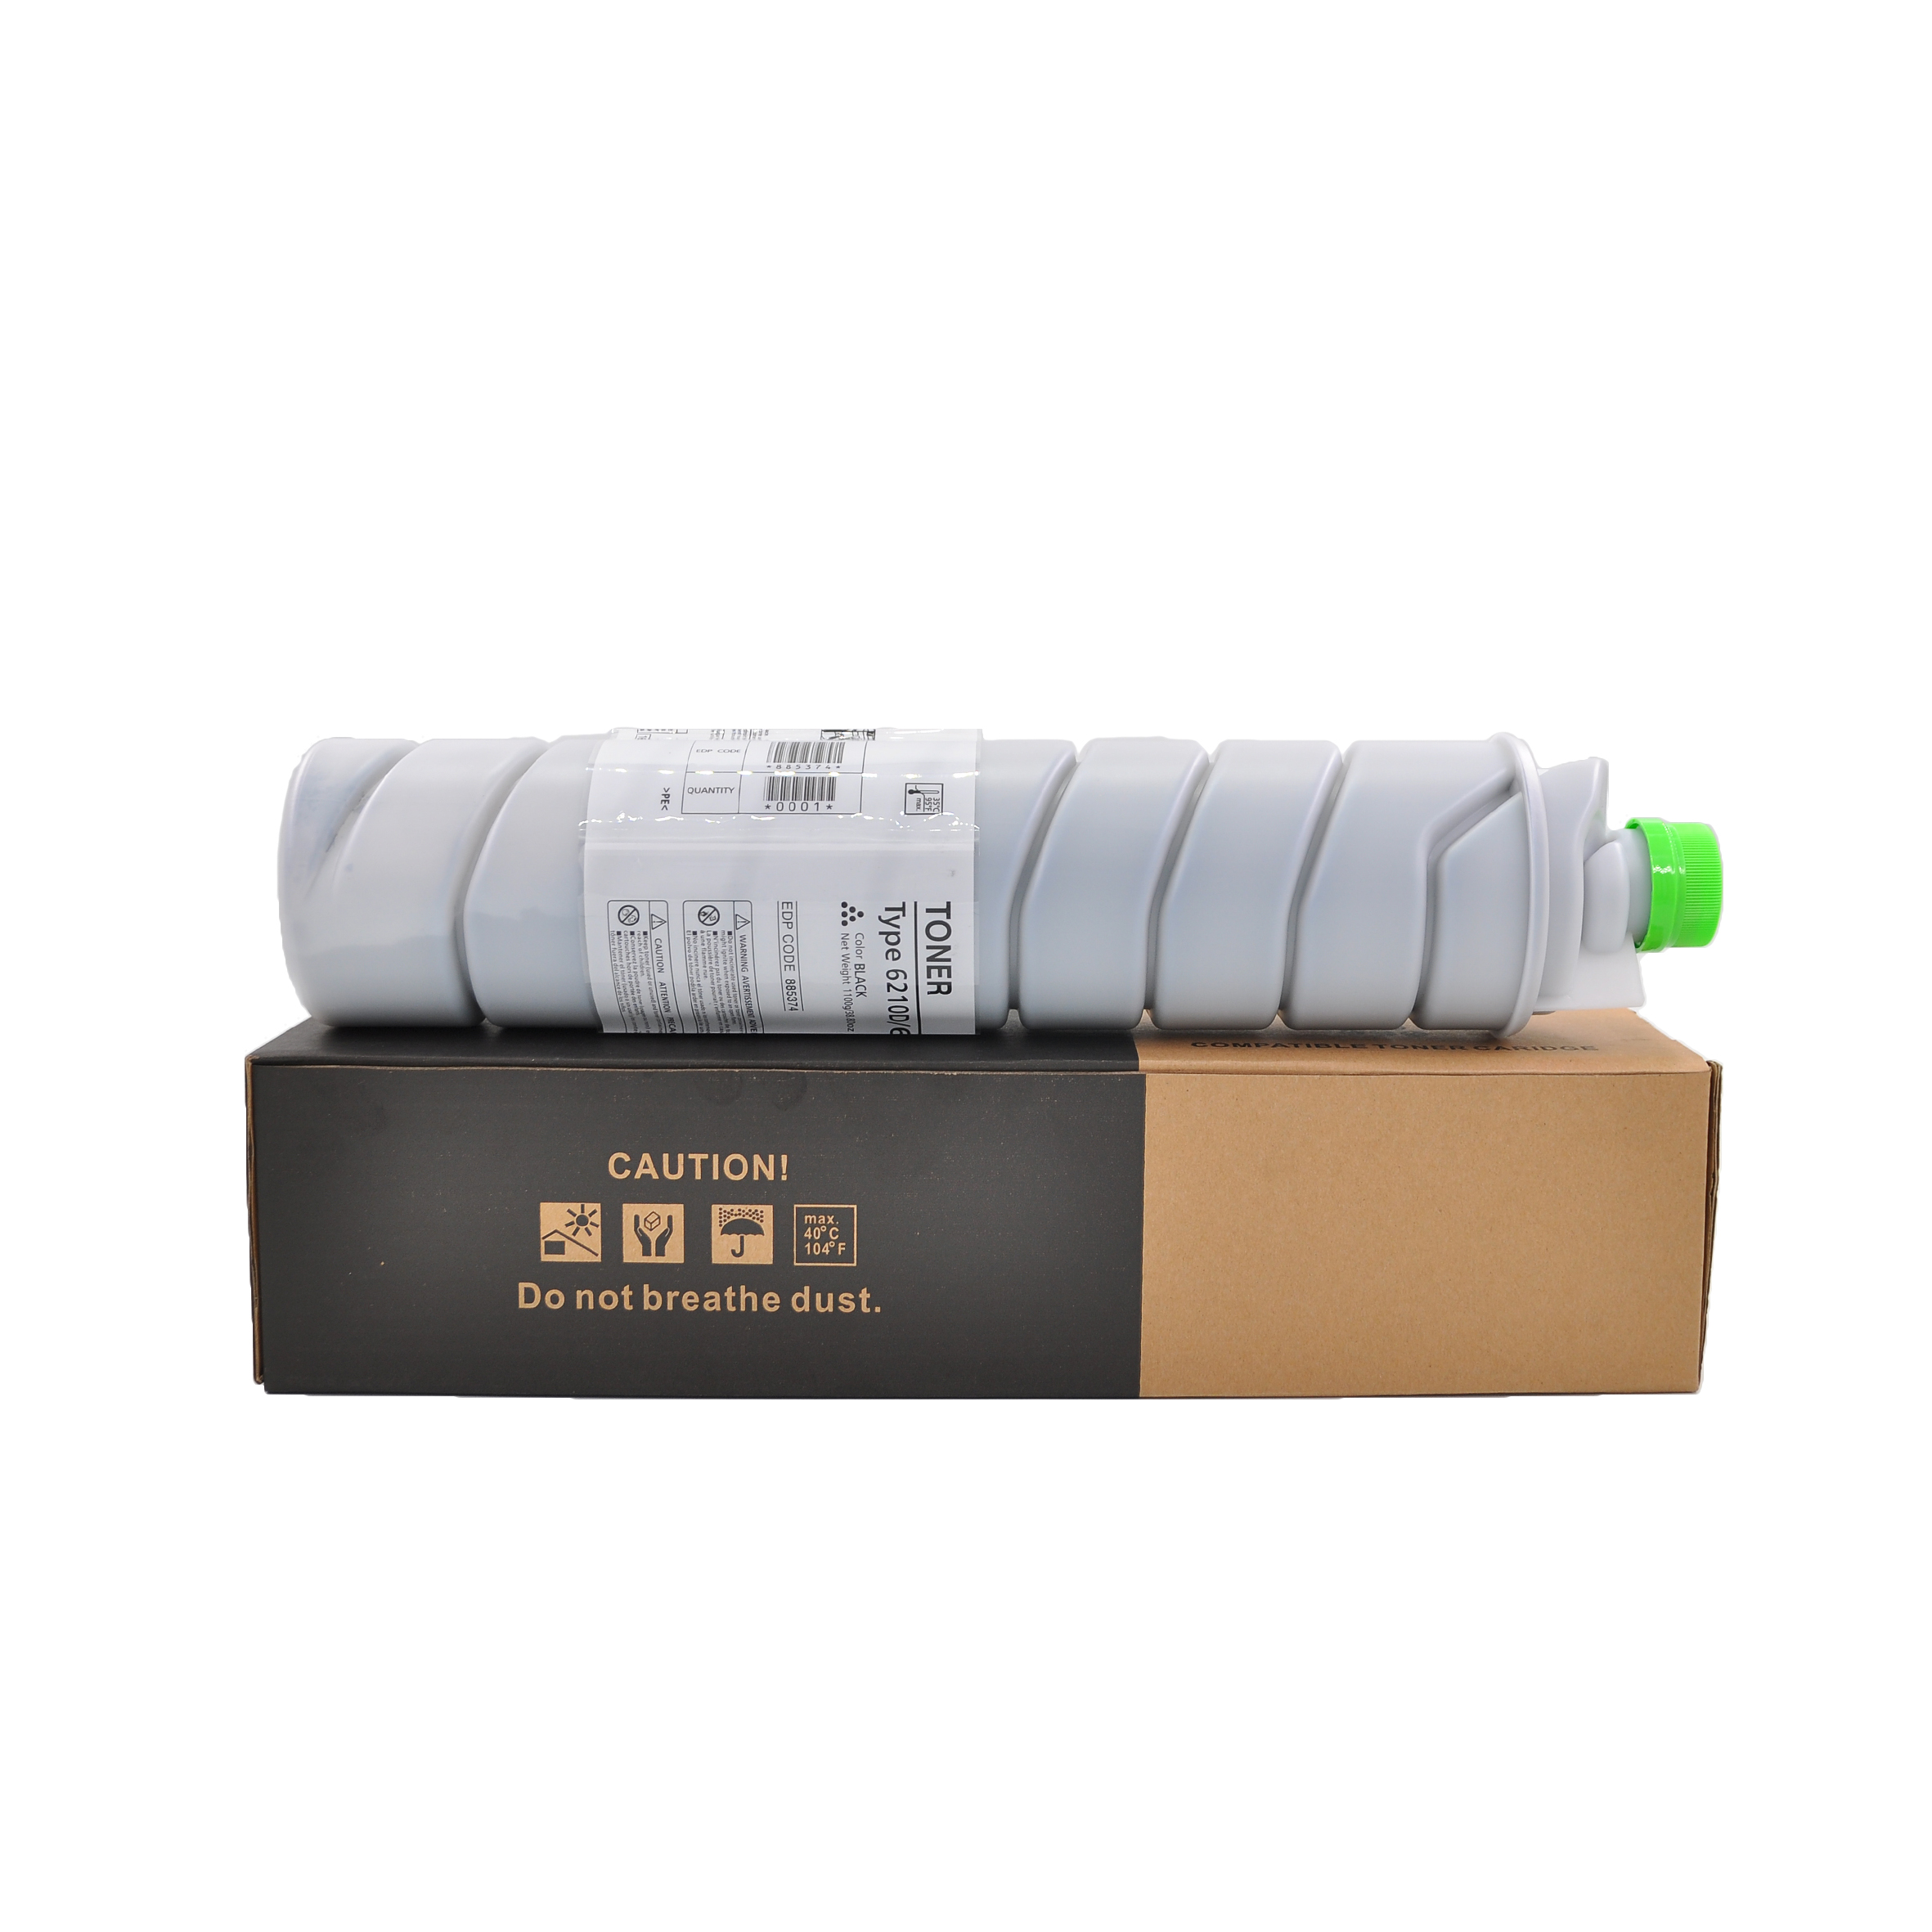 Compatible 6210d copier toner cartridge for use in Ricoh 1075 5500 7500 Featured Image